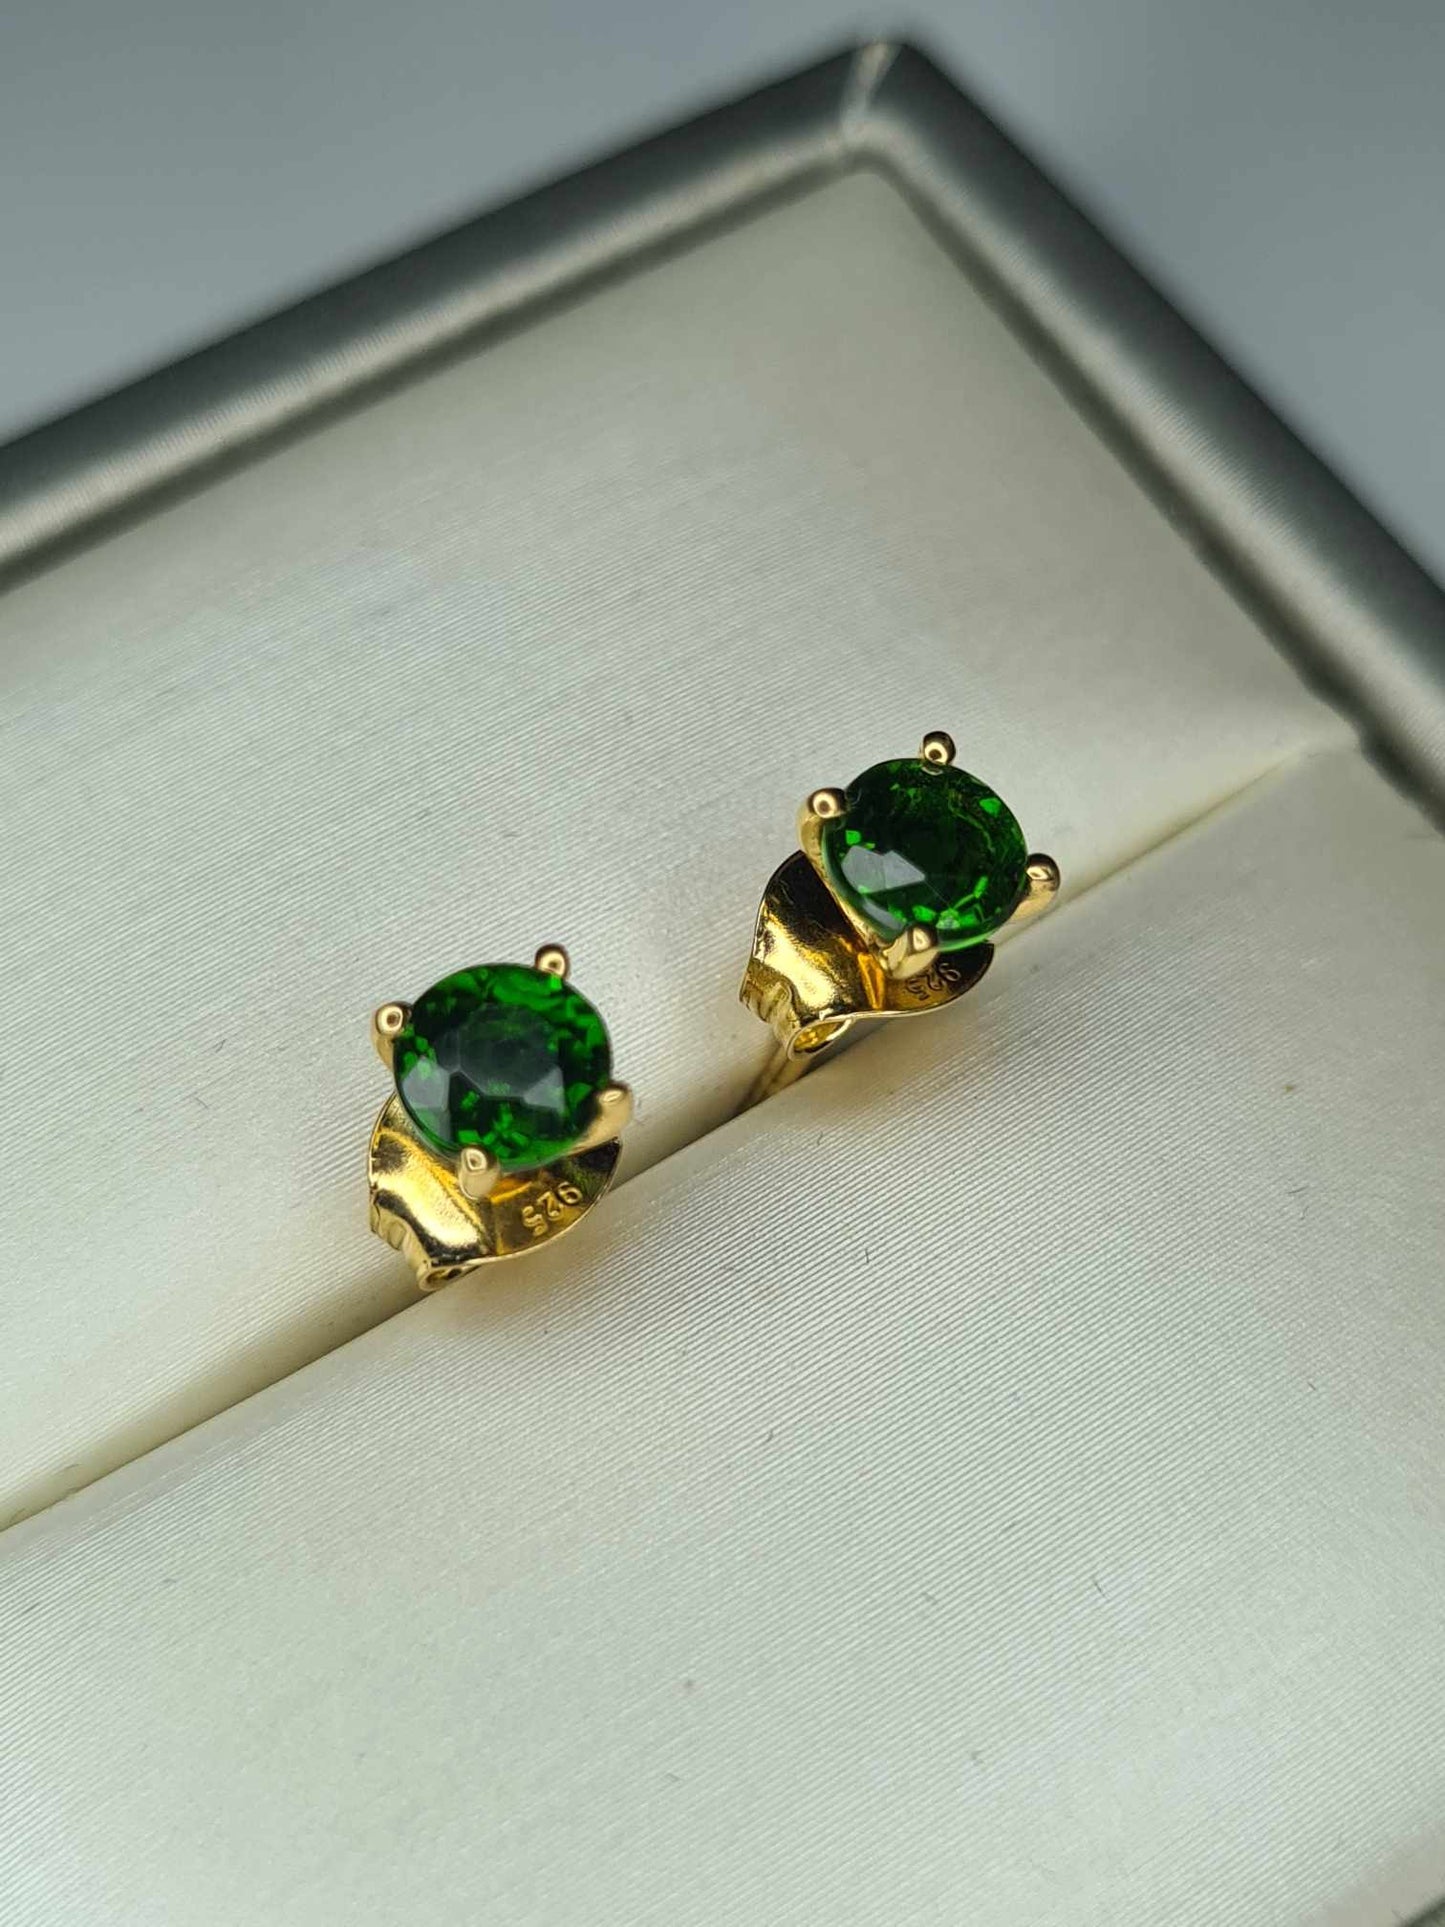 1.14ct Russian Diopside Stud Earrings in 18K Yellow Gold Overlay 925 Sterling Silver